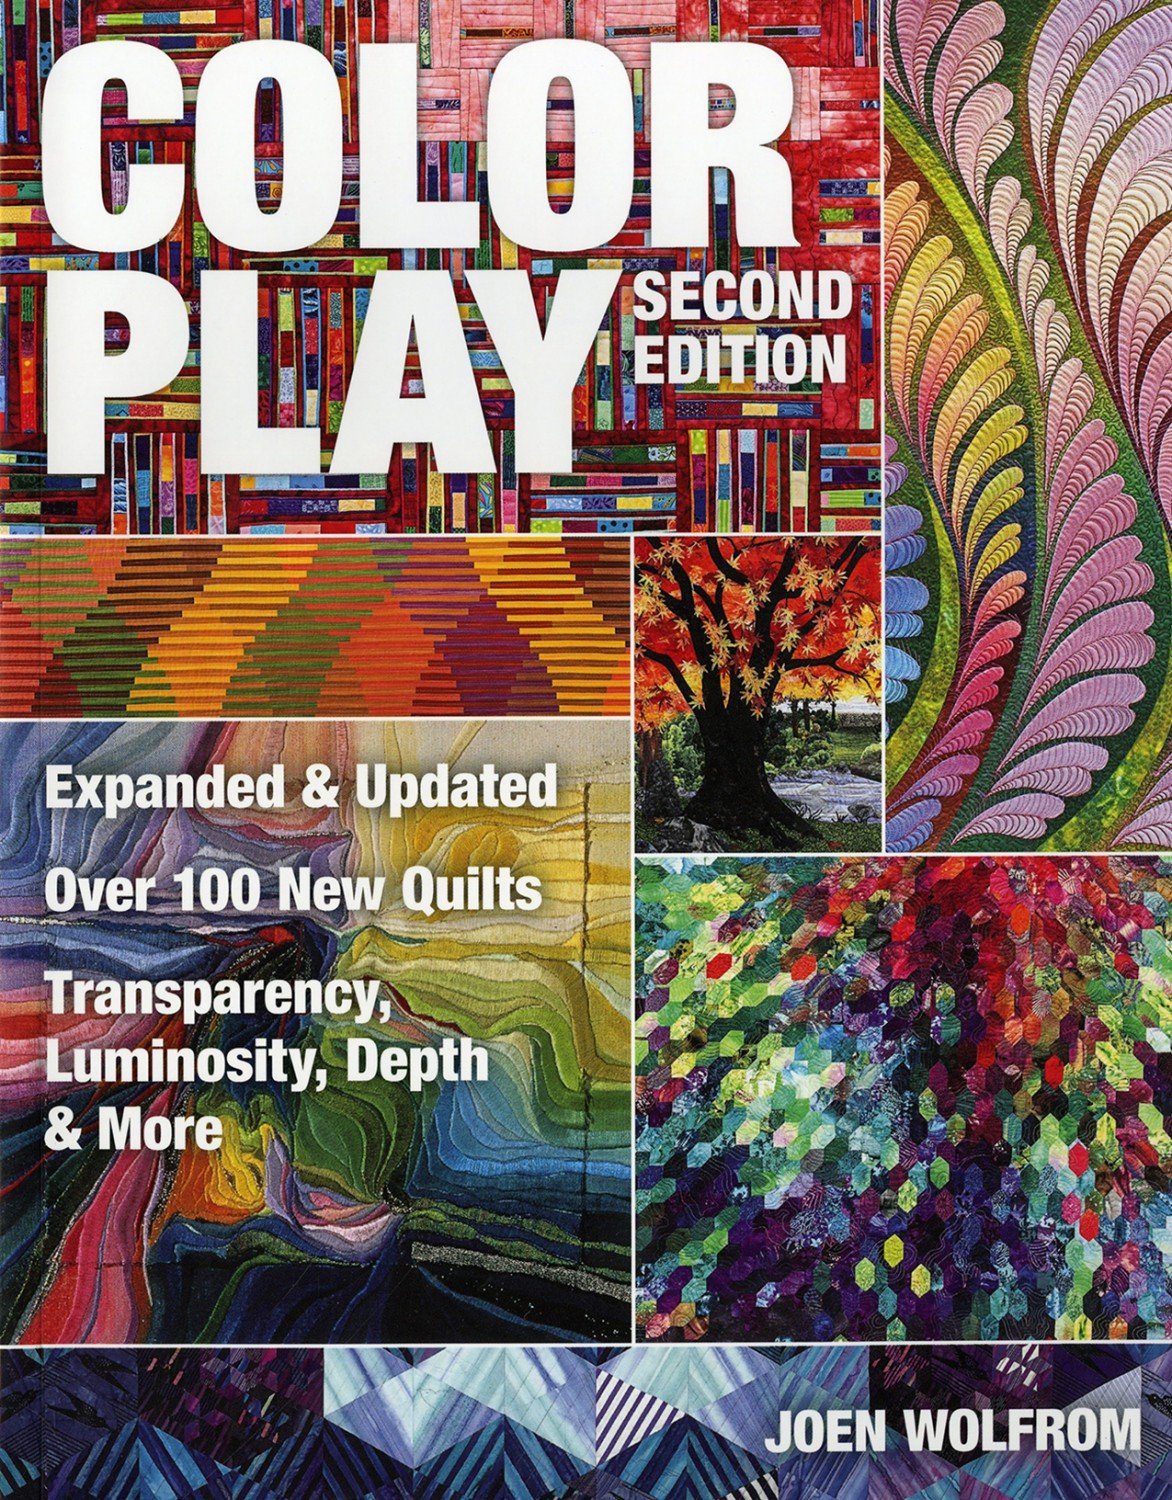 Color Play Expanded & Updated Quilt Pattern Book by Joen Wolfrom for C&T Publishing